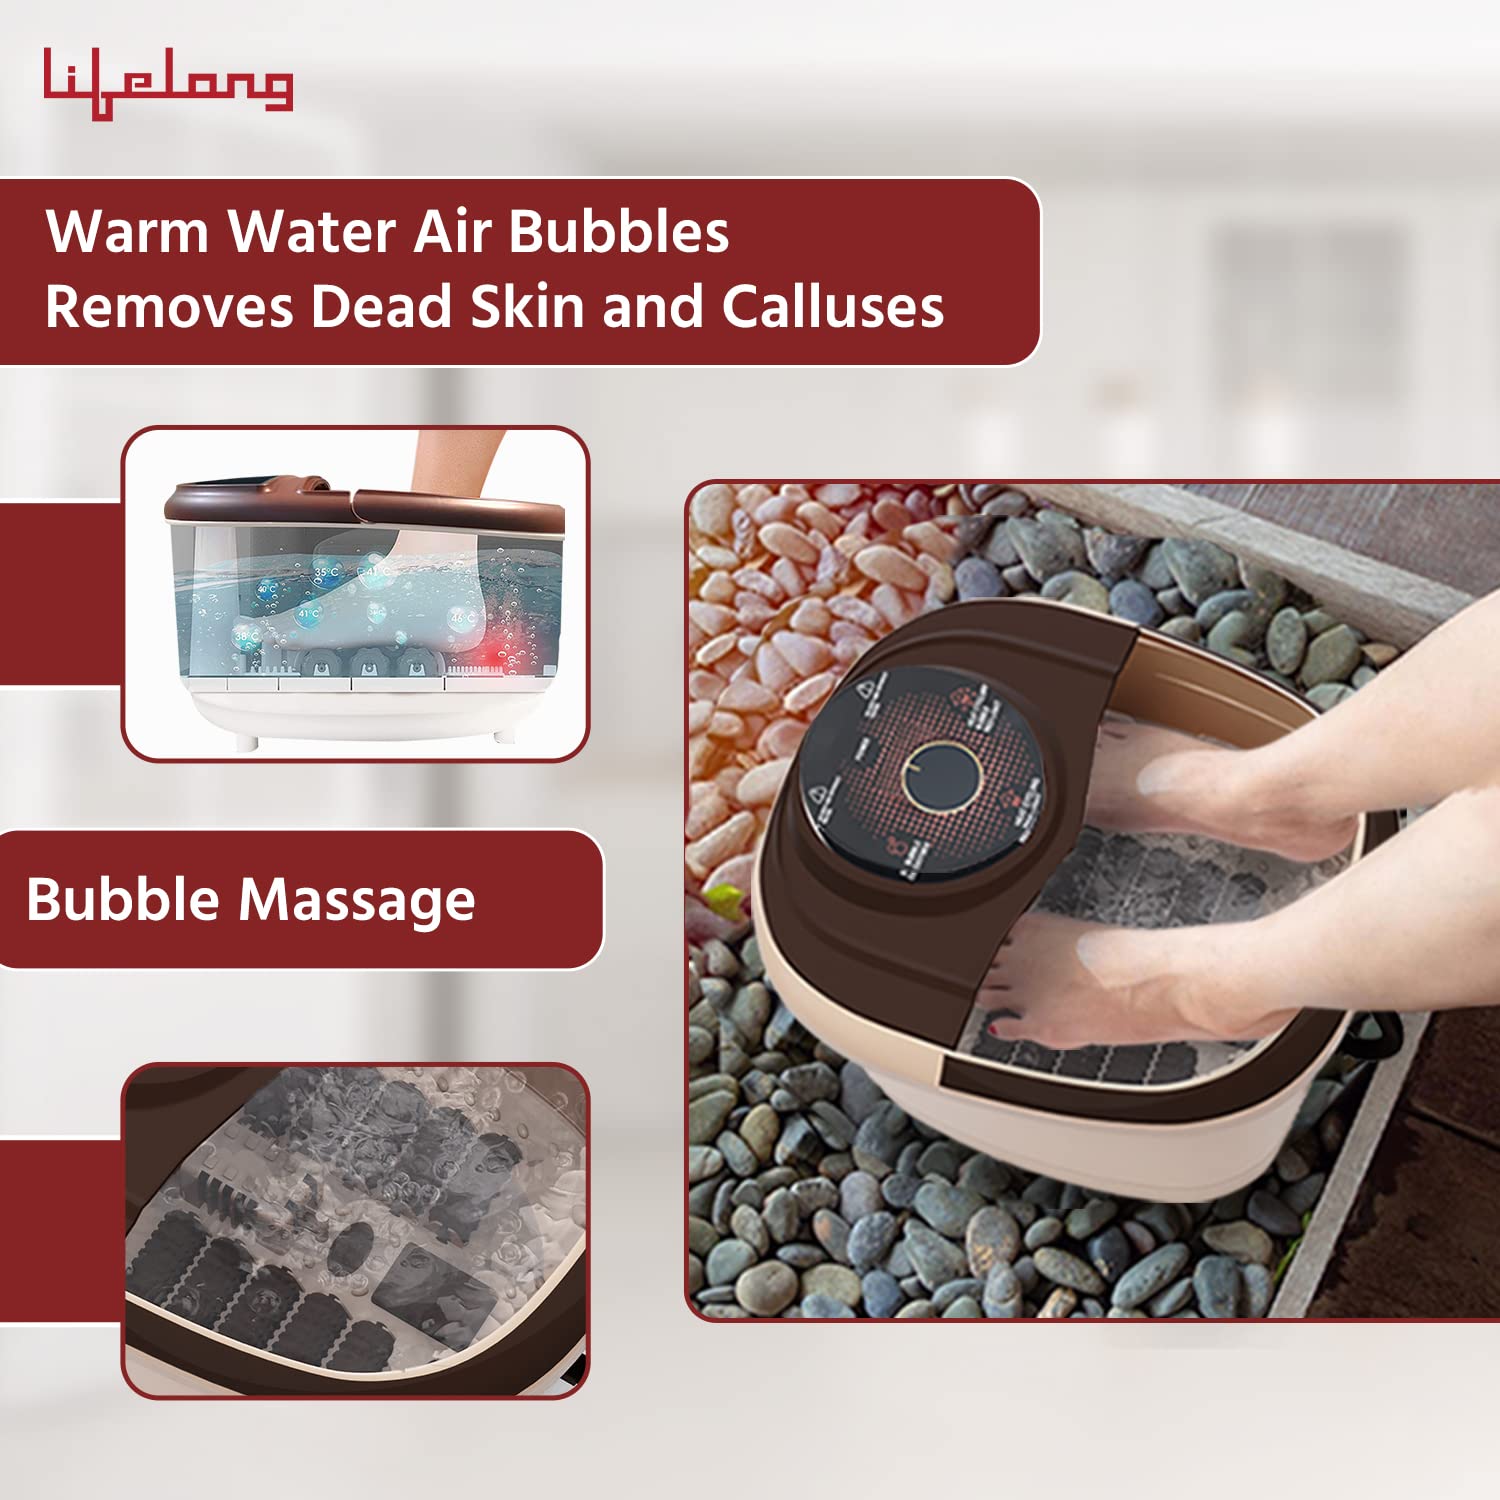 Lifelong LLM405 Foot Spa Massager with Manual Rollers, Digital Panel.